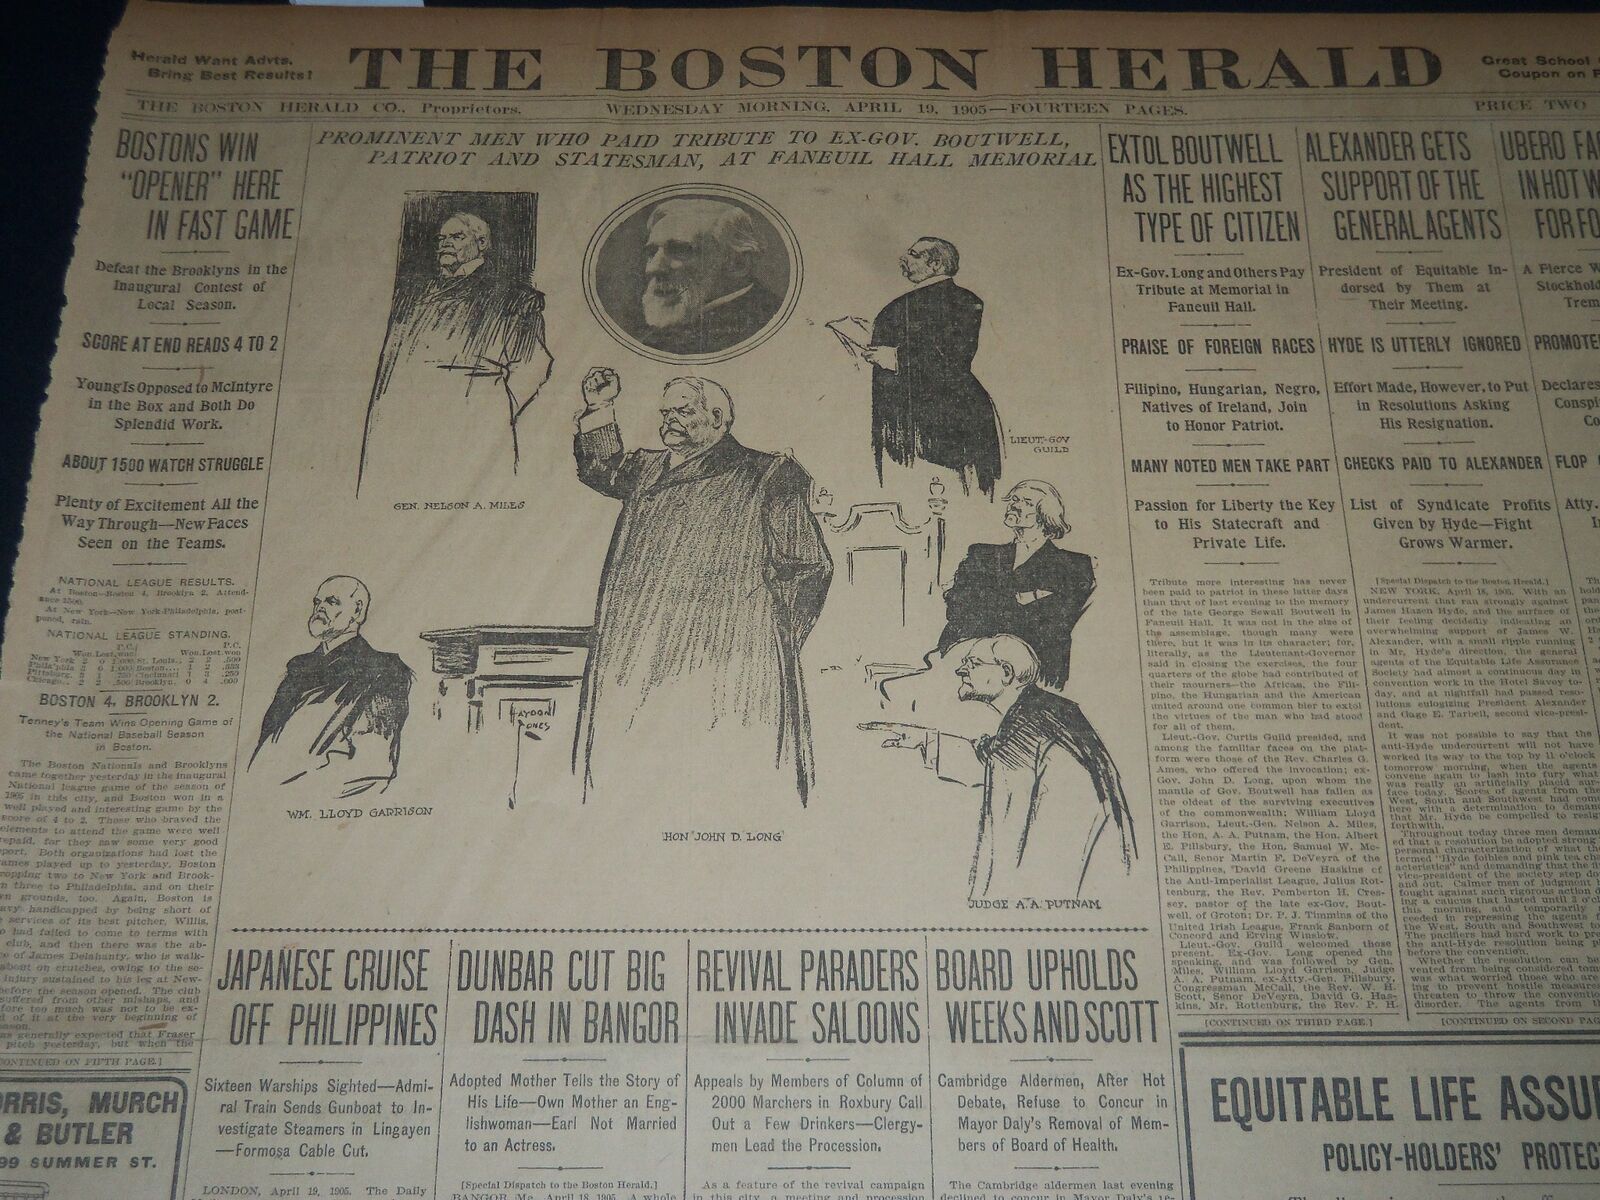 1905 APRIL 19 THE BOSTON HERALD - BOSTON WINS OPENER HERE IN FAST GAME - BH 161